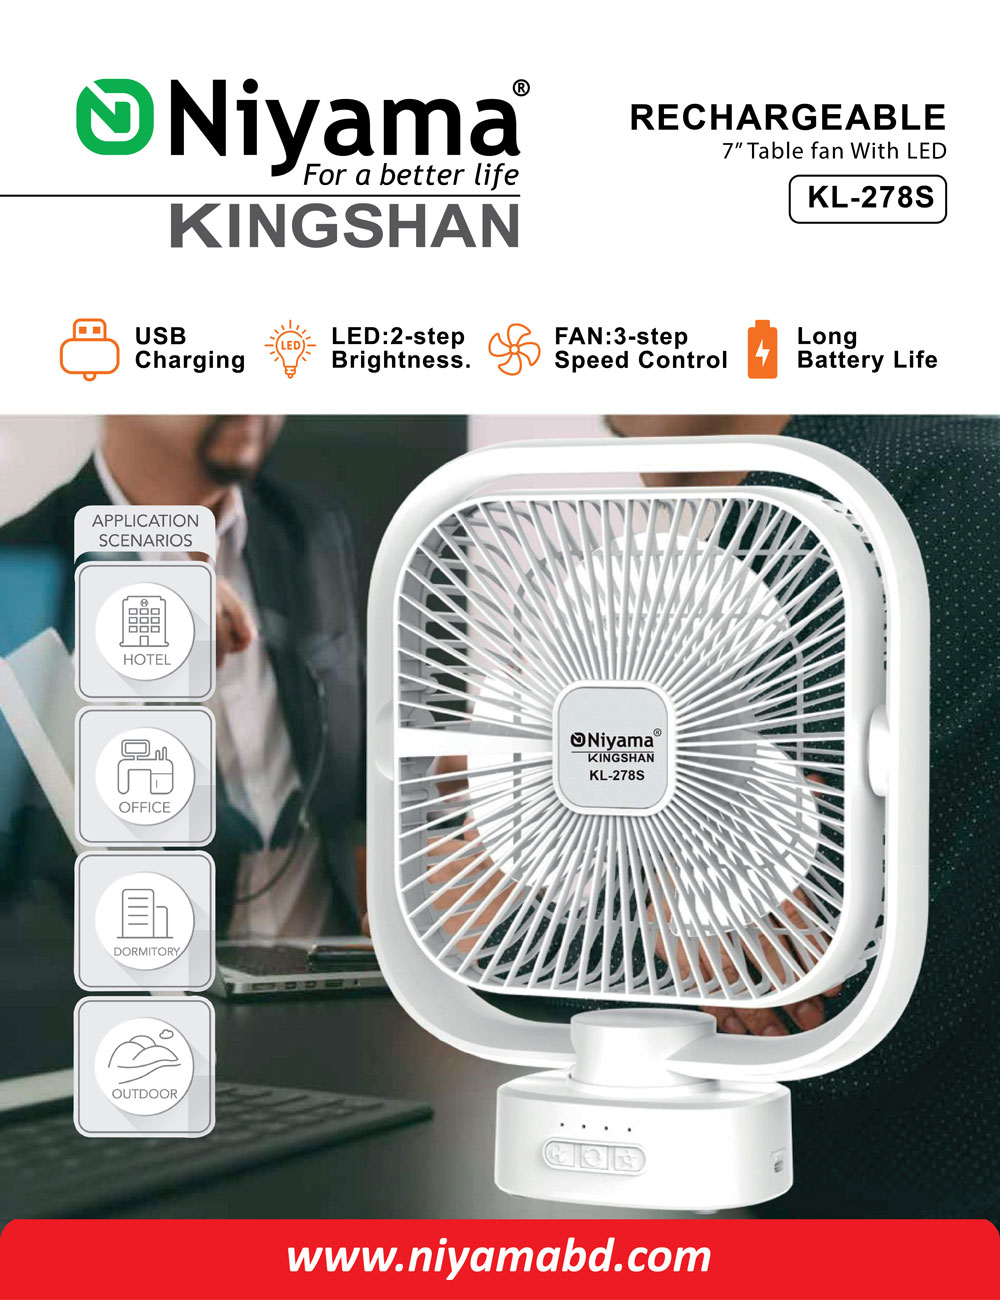 Stay Cool Anywhere You Go with the KL-278S Rechargeable Mini Fan!